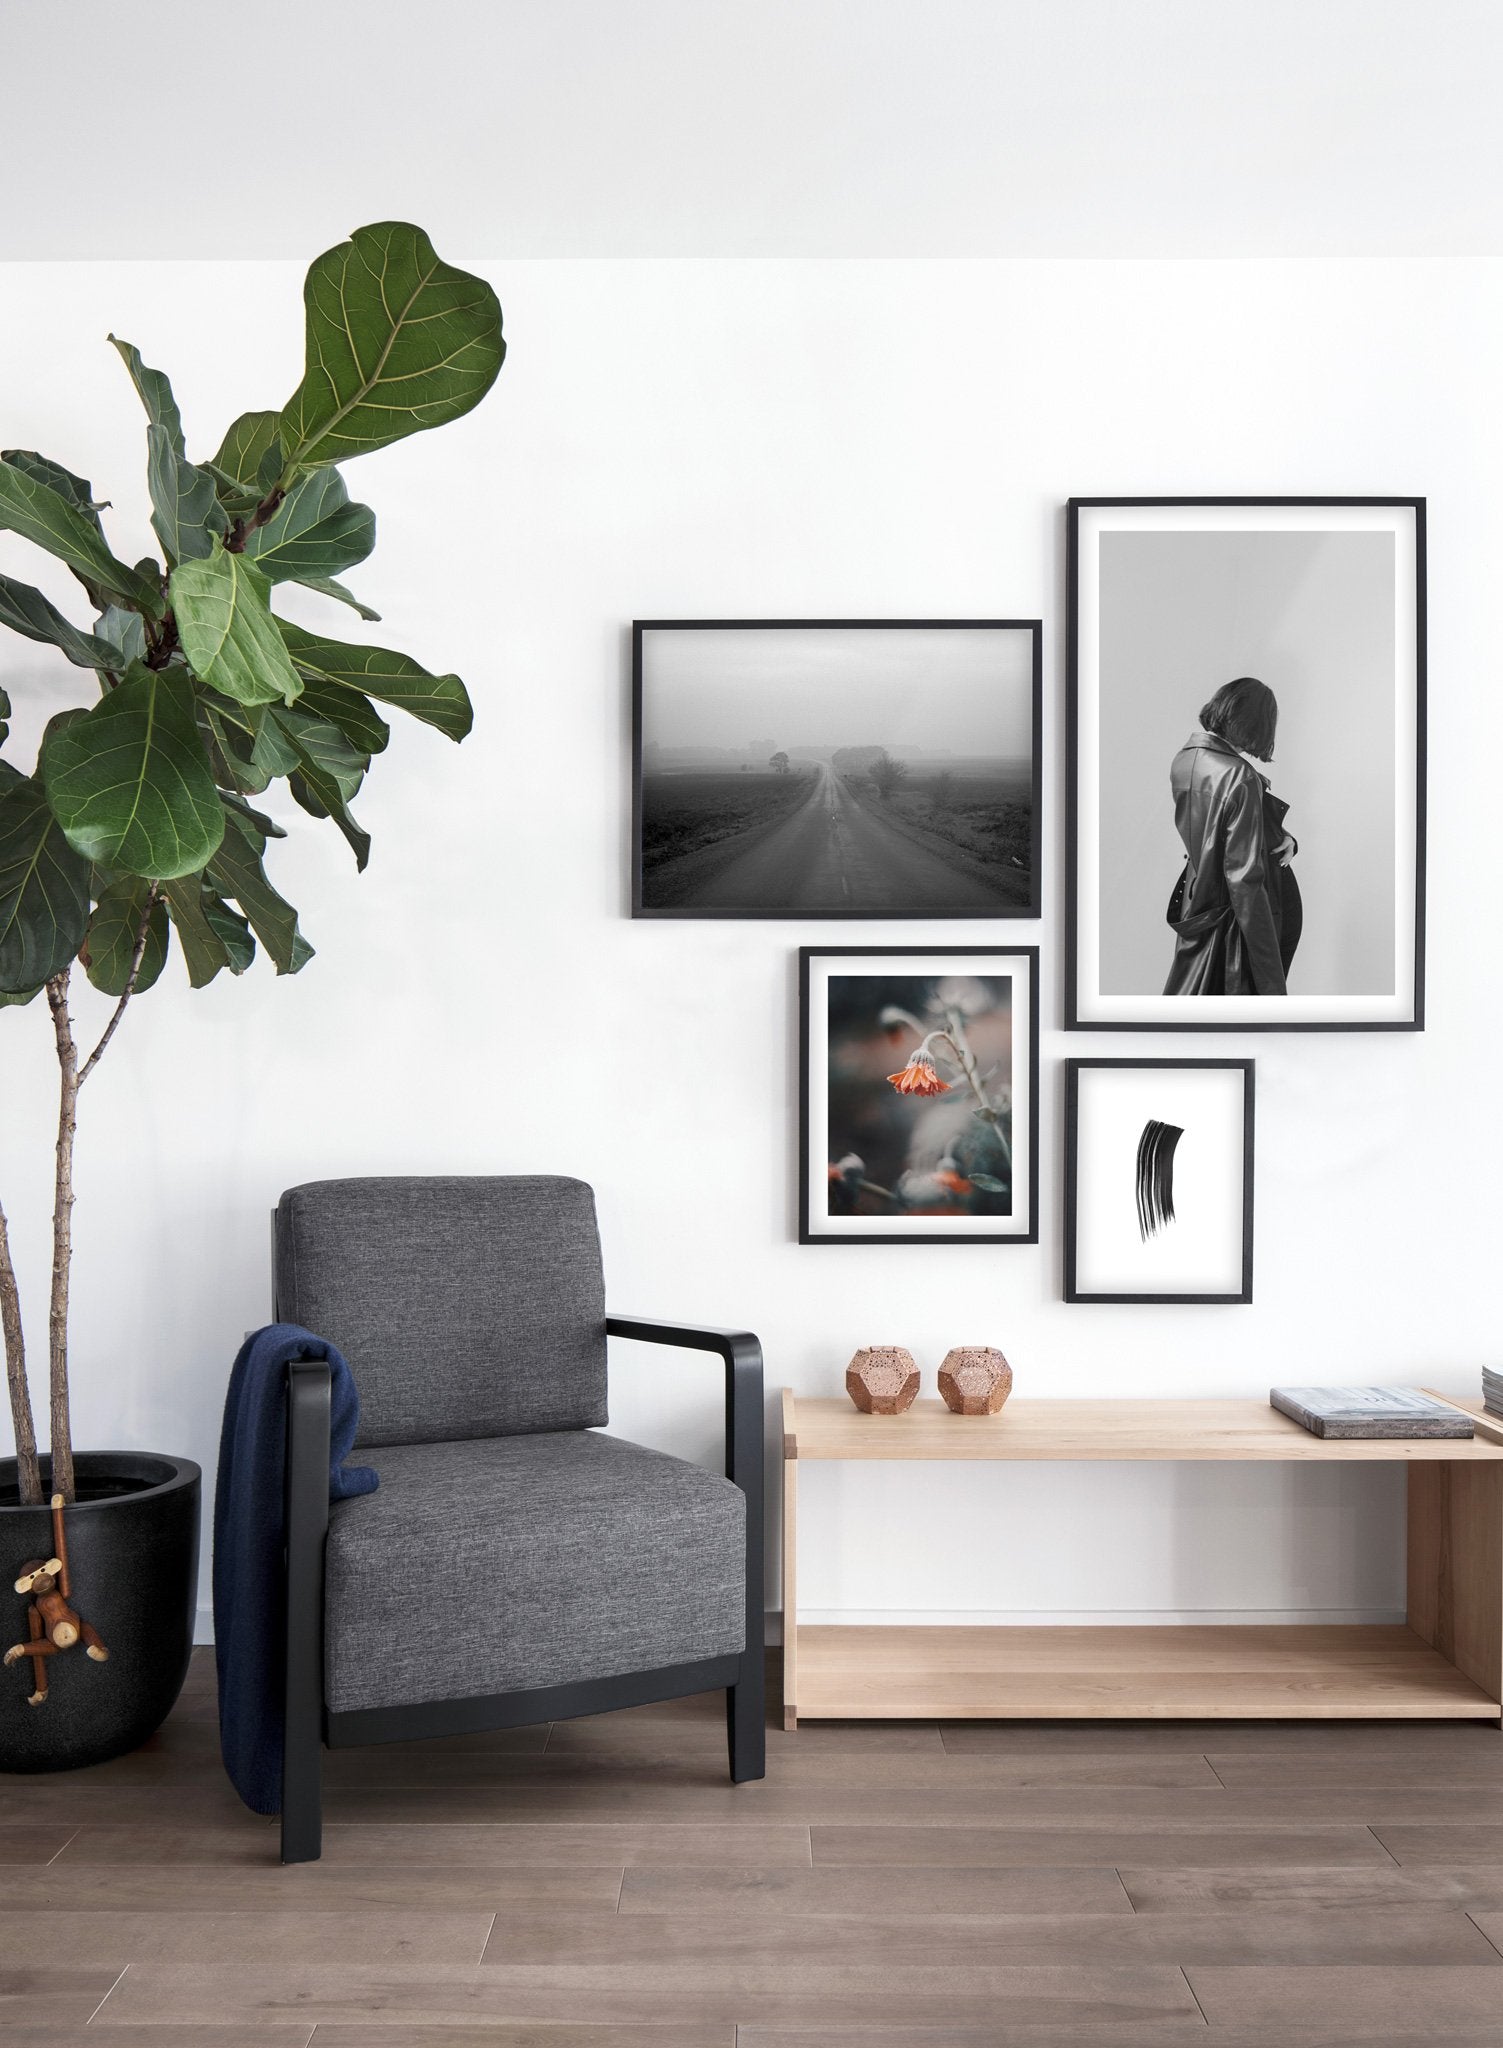 Into the Mist modern minimalist photography poster by Opposite Wall - Living room with fireplace